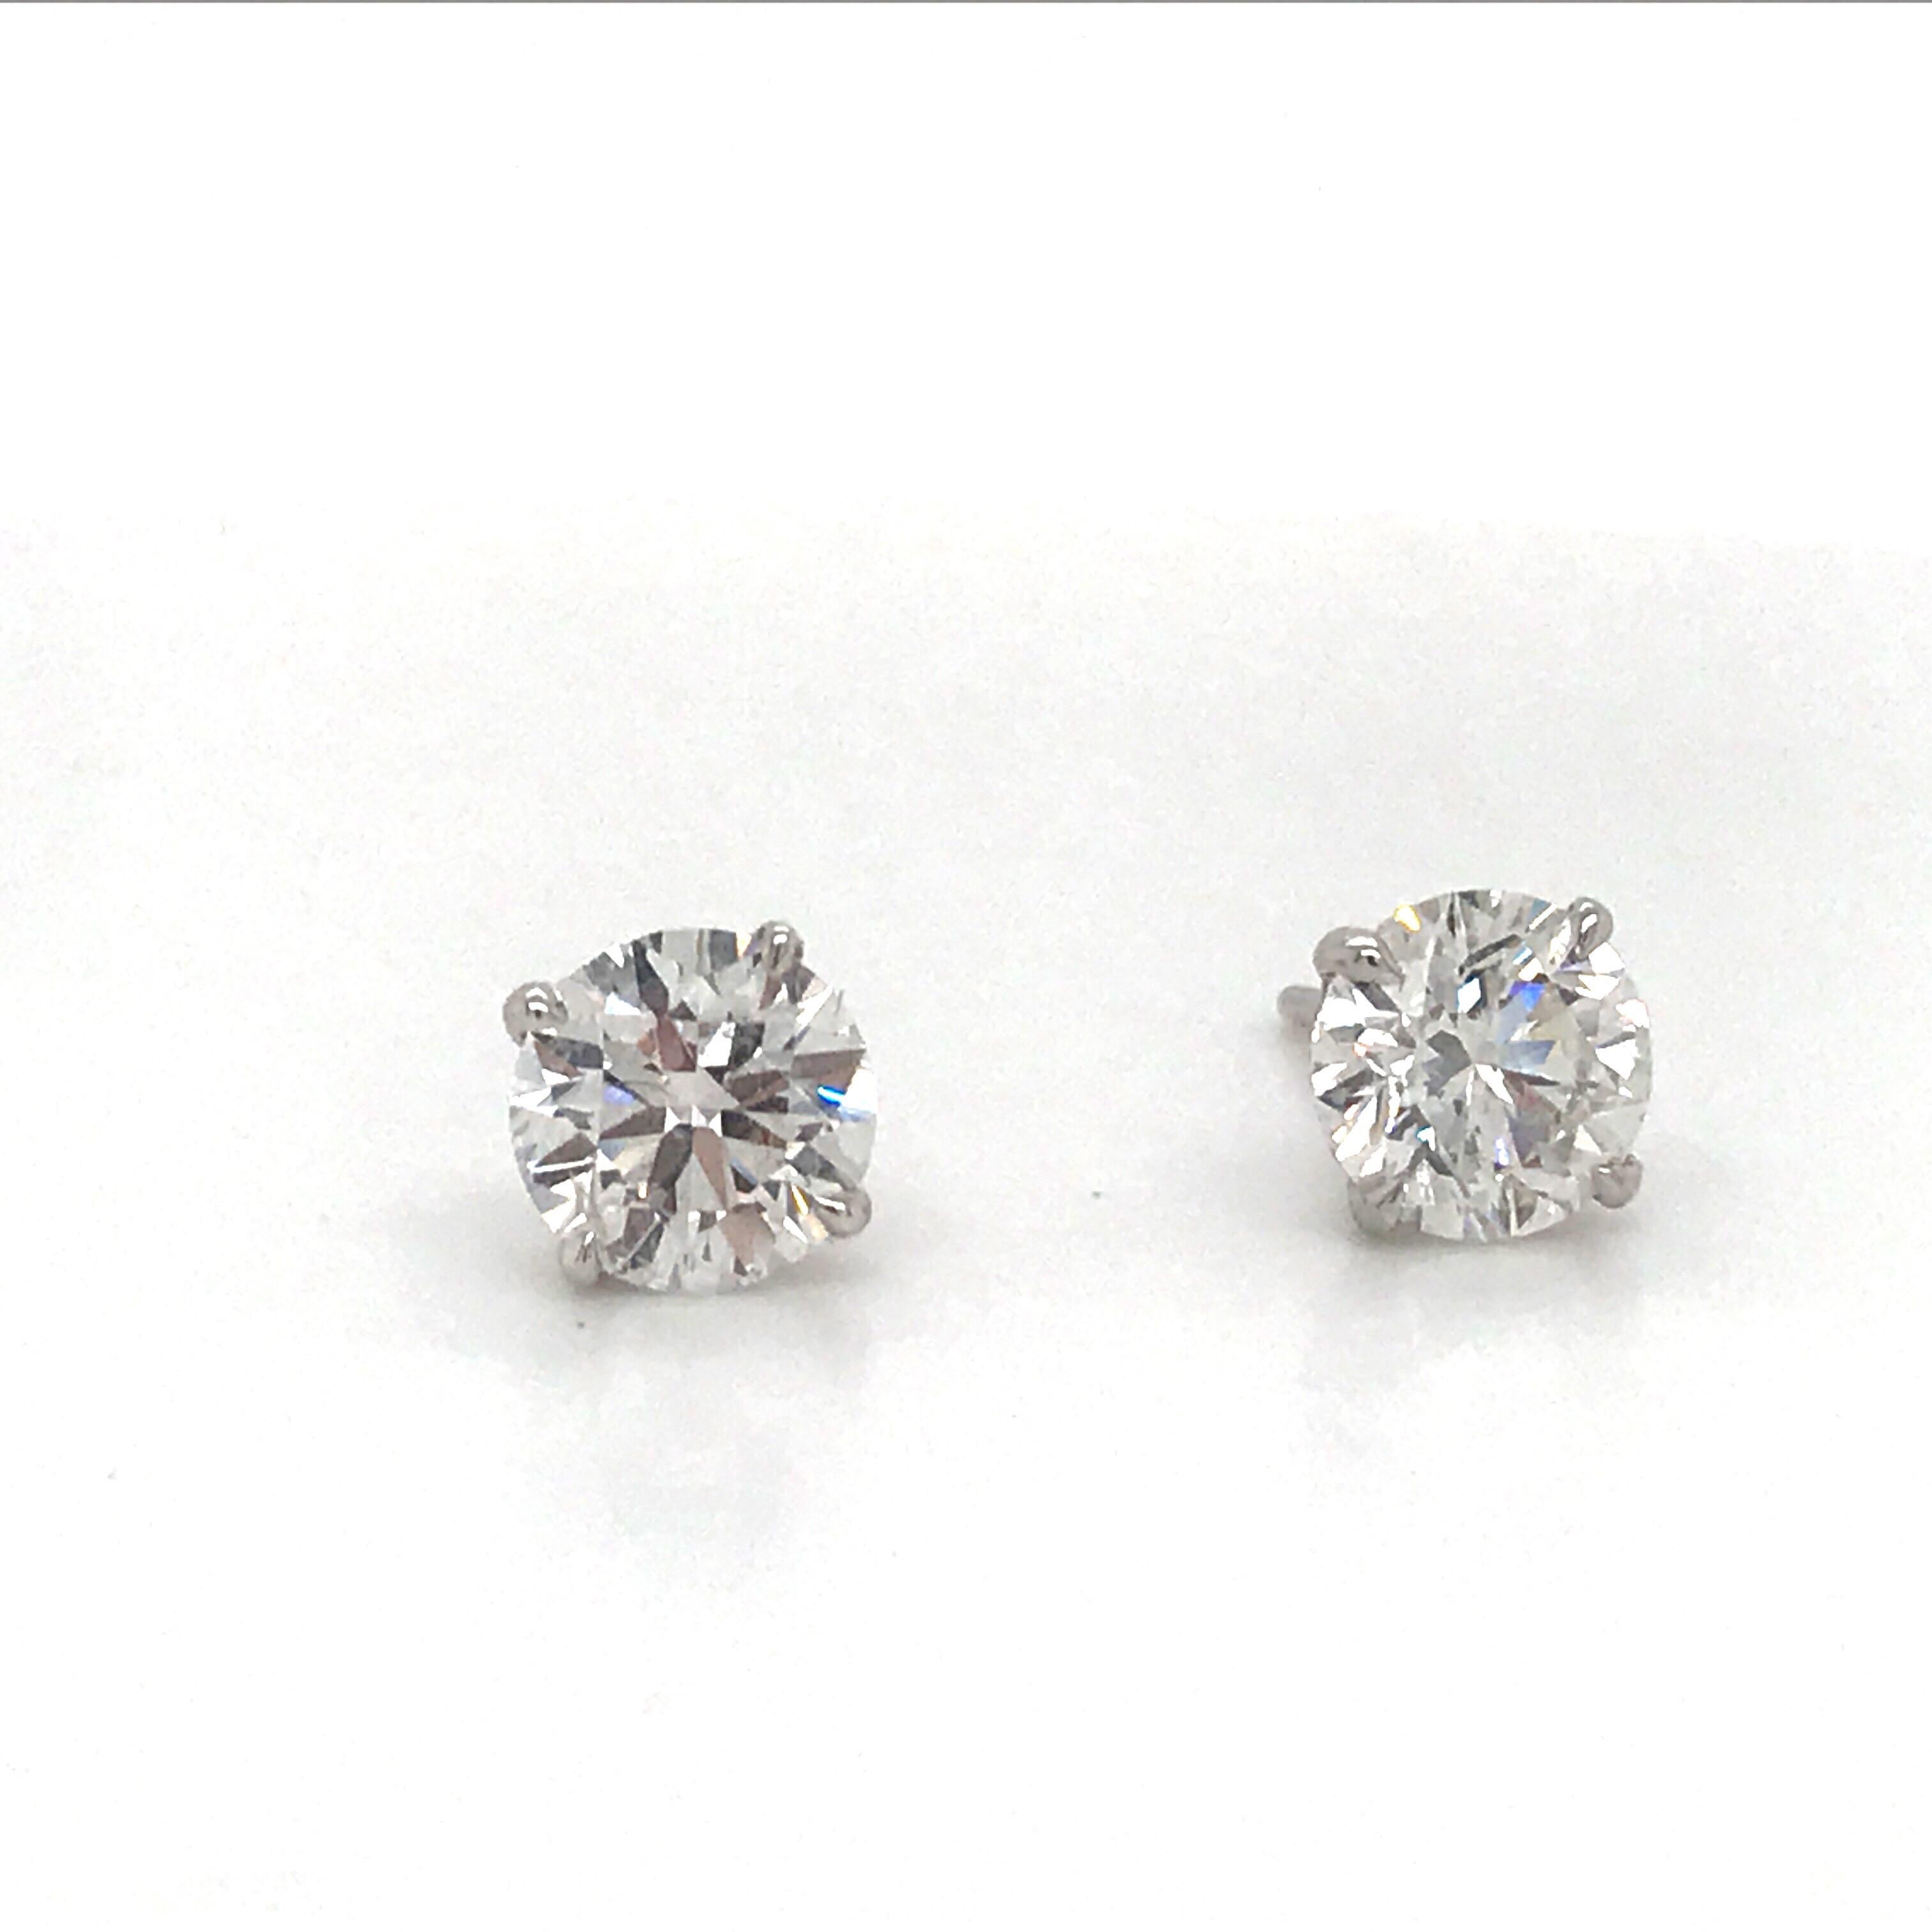 IGI Certified diamond stud earrings weighing 2.61 carats in a 4 prong champagne setting, 18k white gold.
Color G
Clarity SI2
